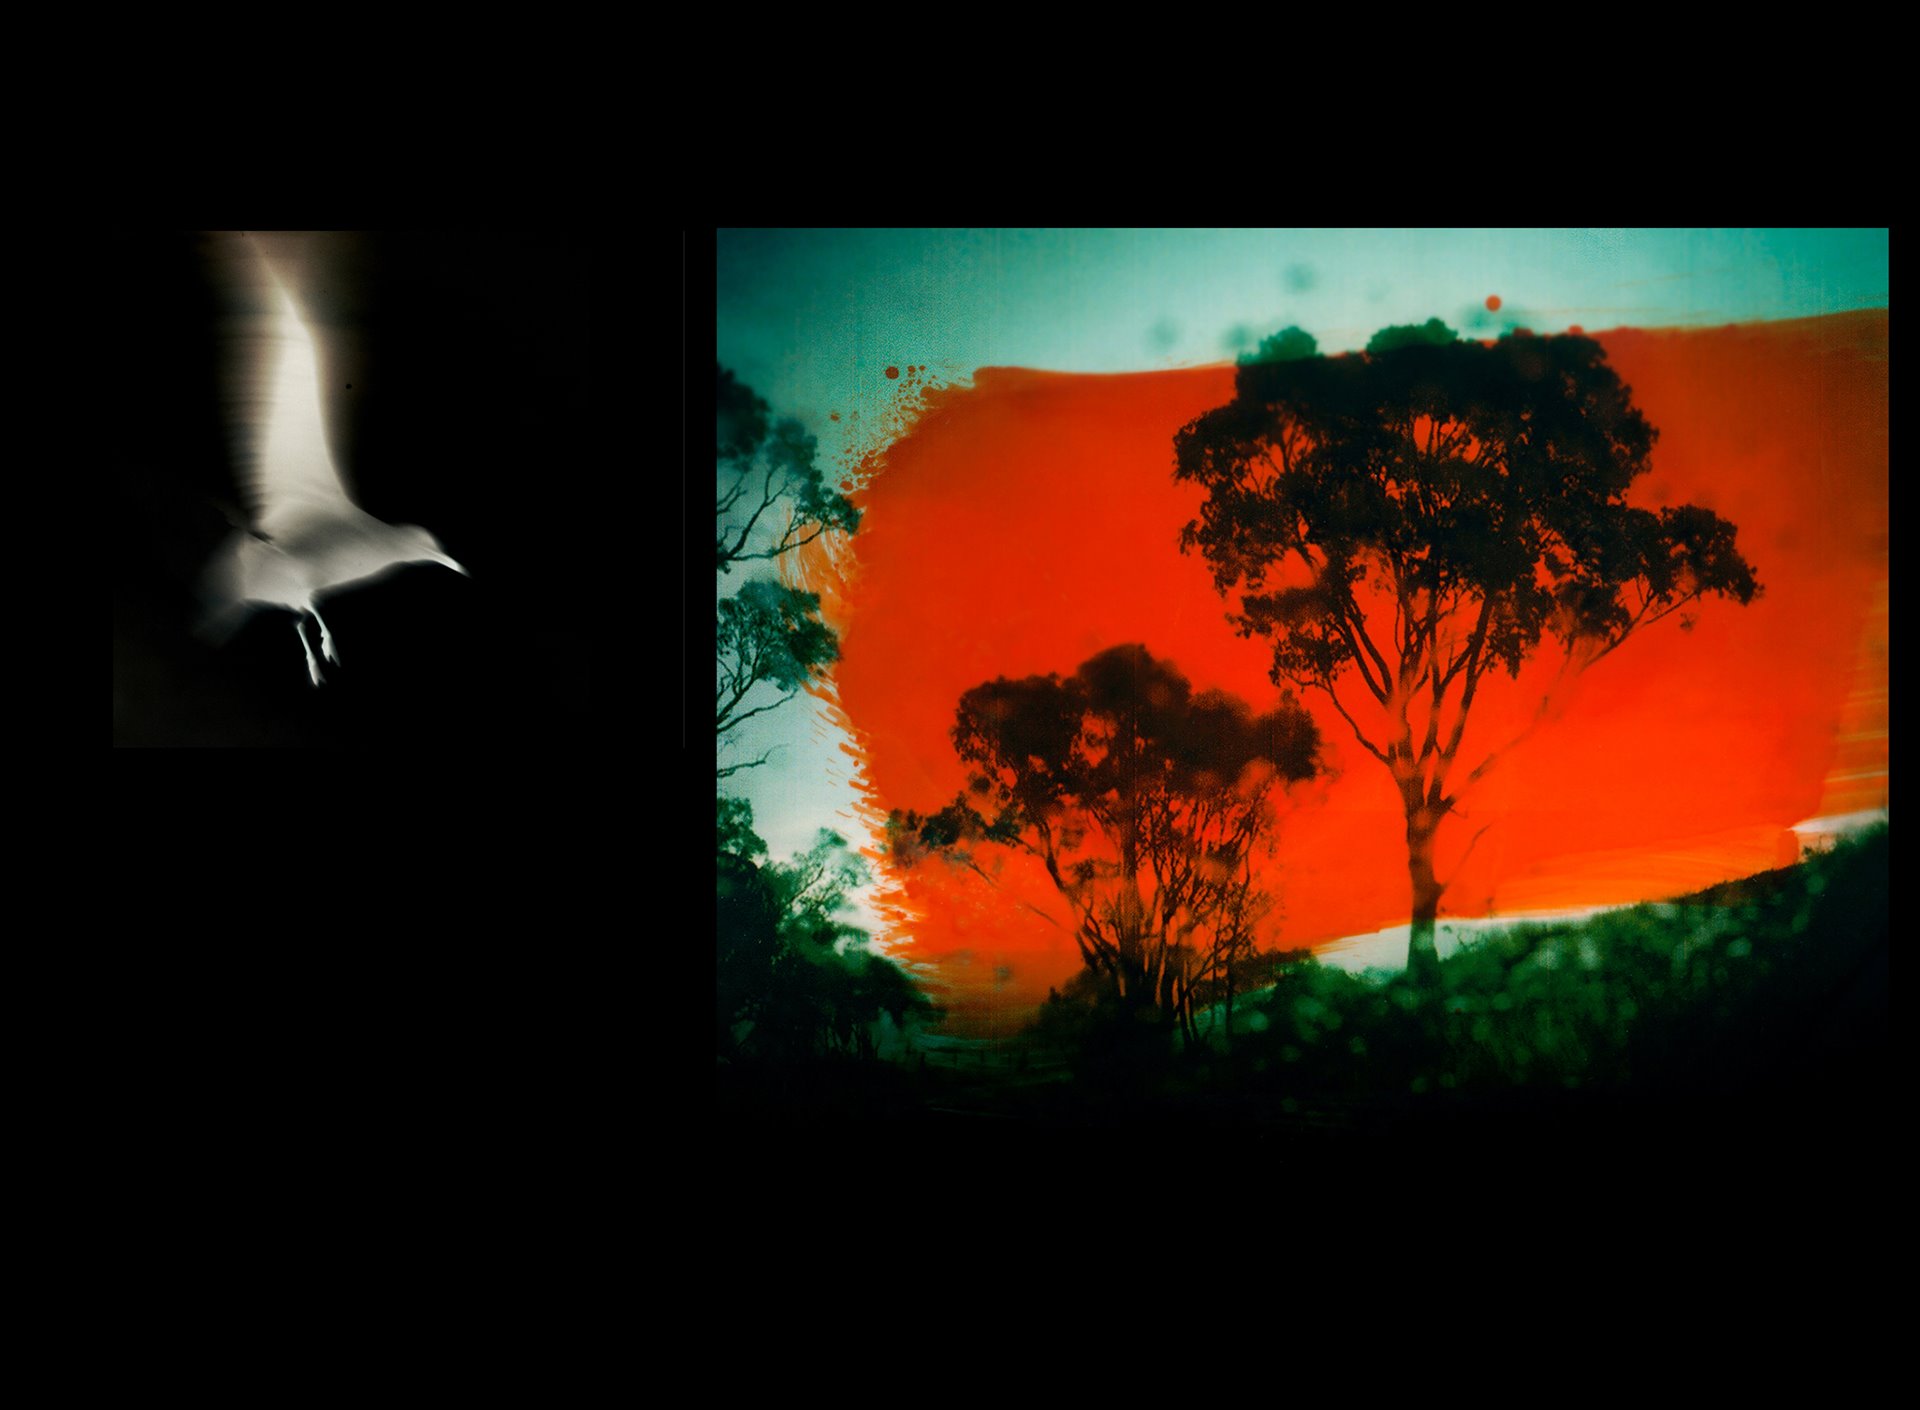 (Left) A bird flies over the Australian landscape after a wildfire. (Right) A photograph taken near Callala Bay (Jerrinja and Wandi Wandian Country), printed then brushed with ink by the photographer.&nbsp;